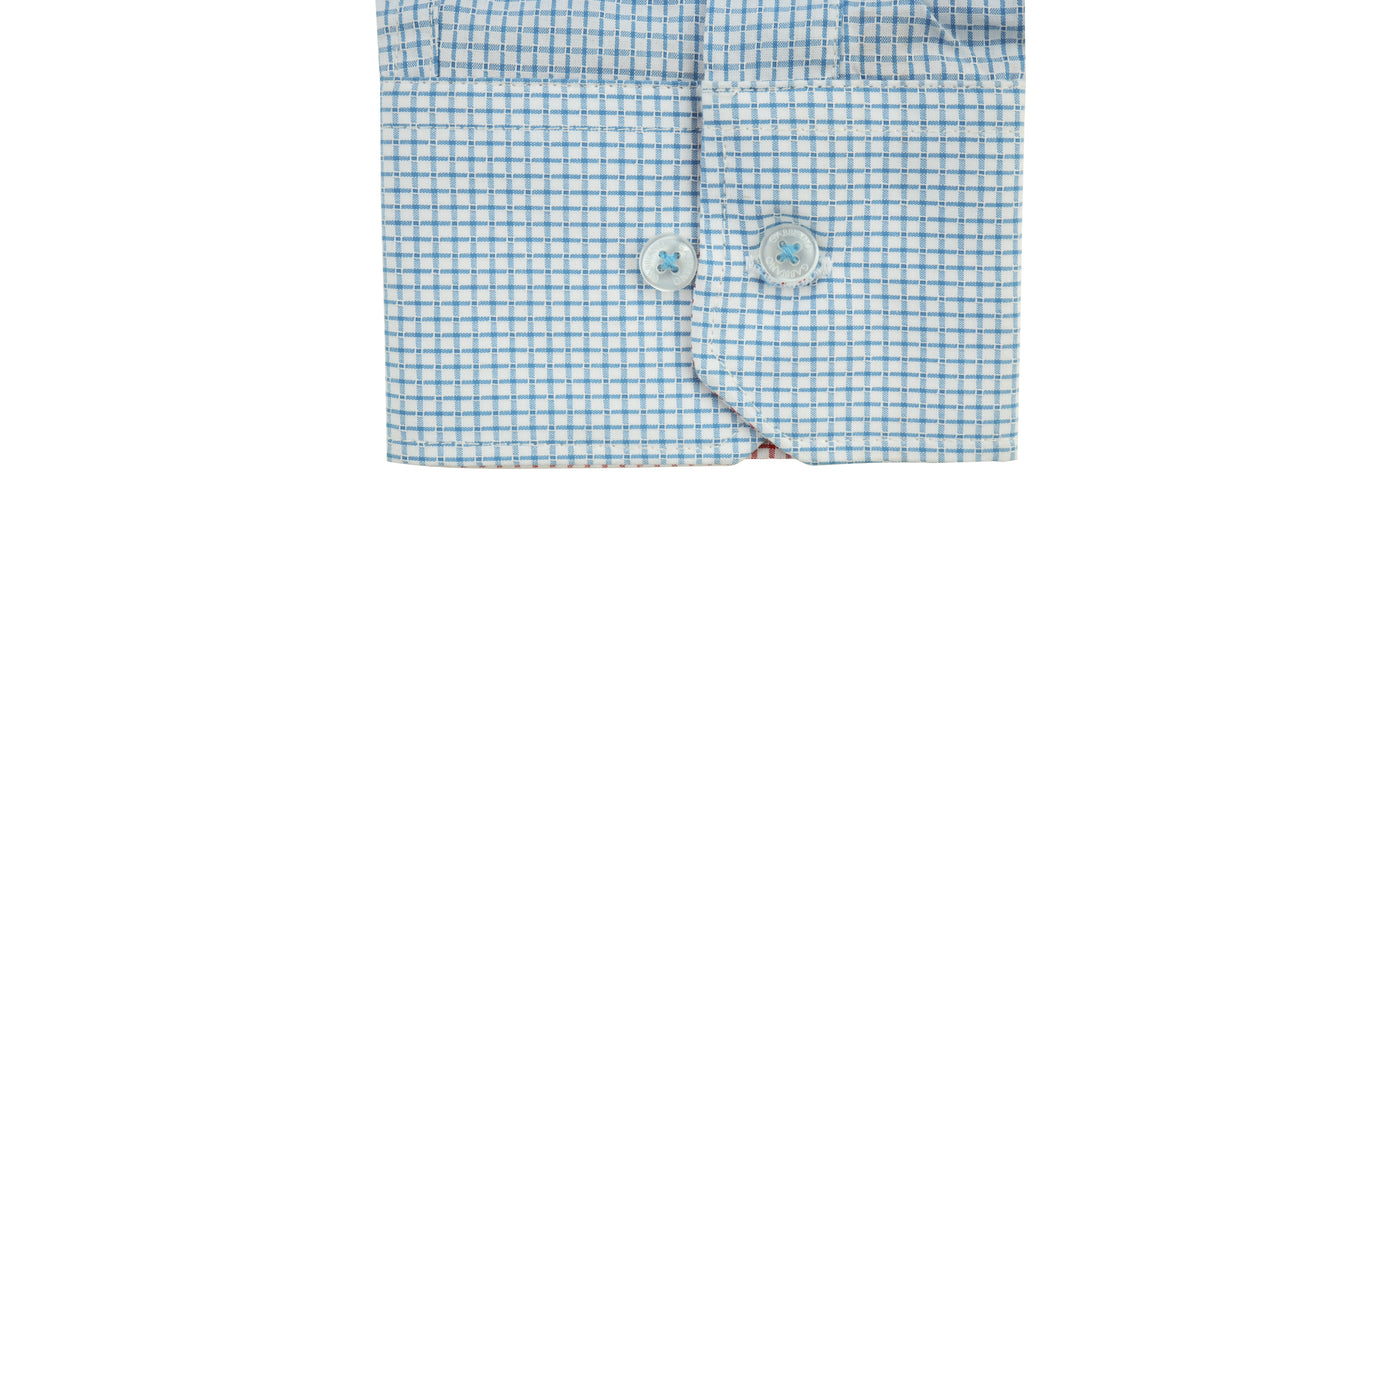 Half-sleeves White and light Blue shirt